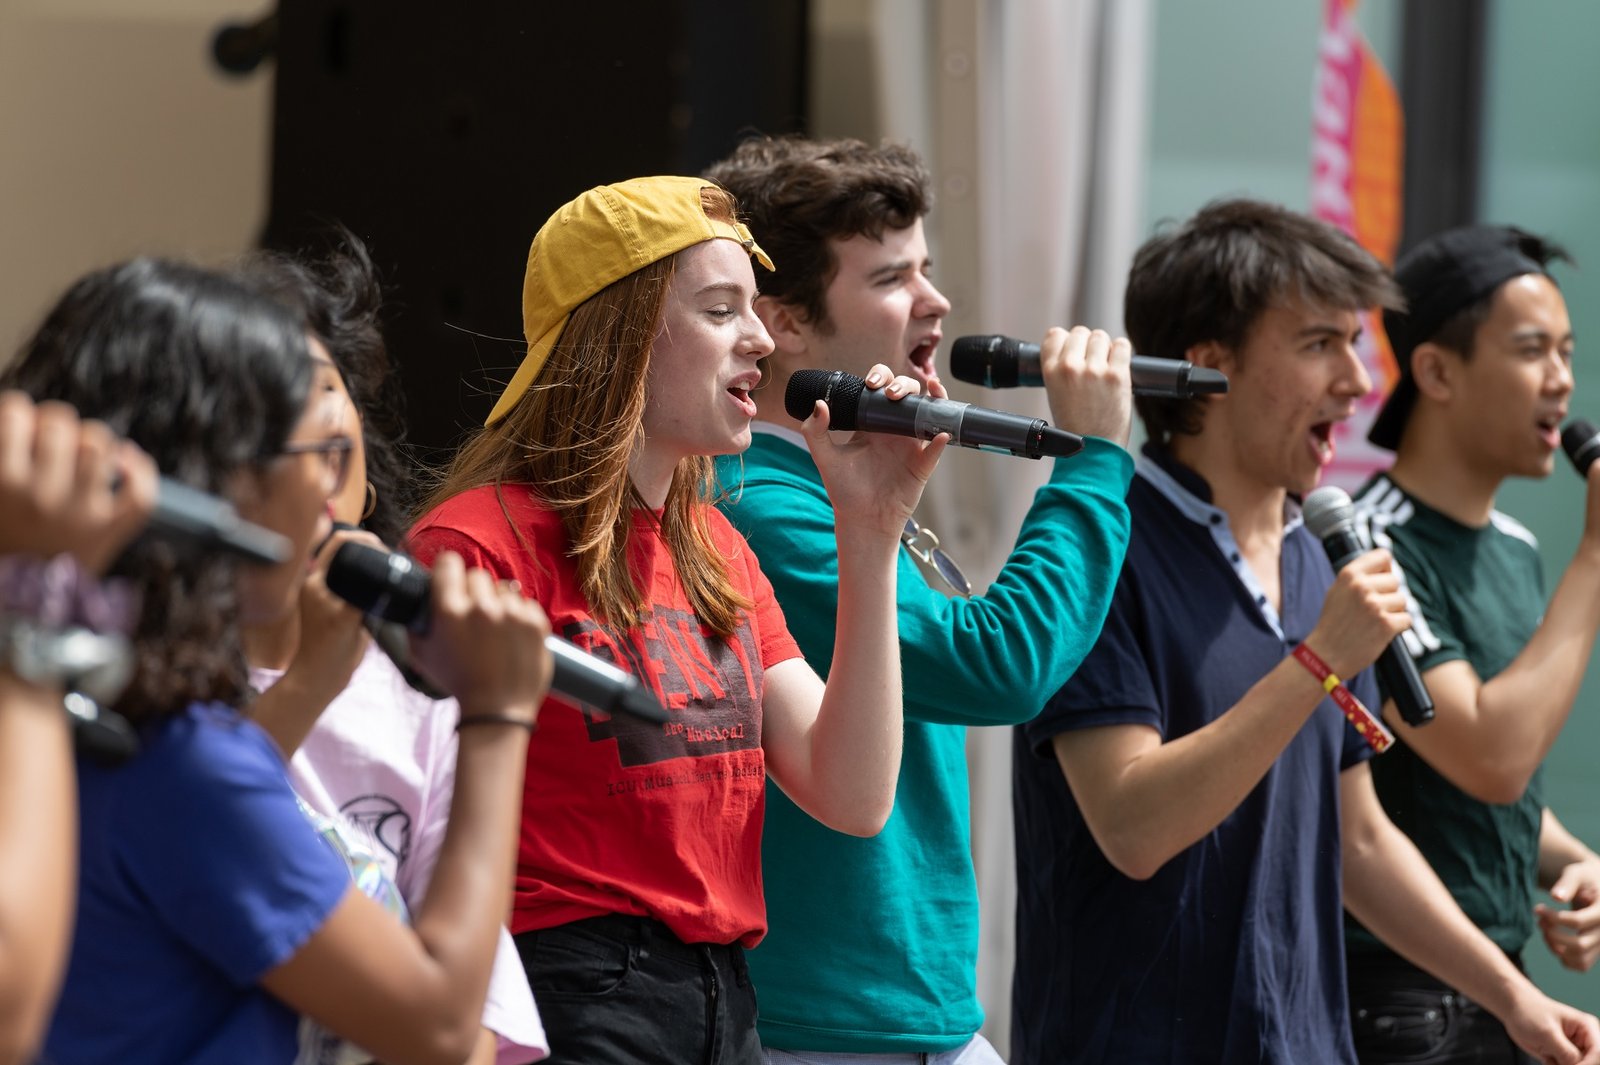 Singers performing at the Festival